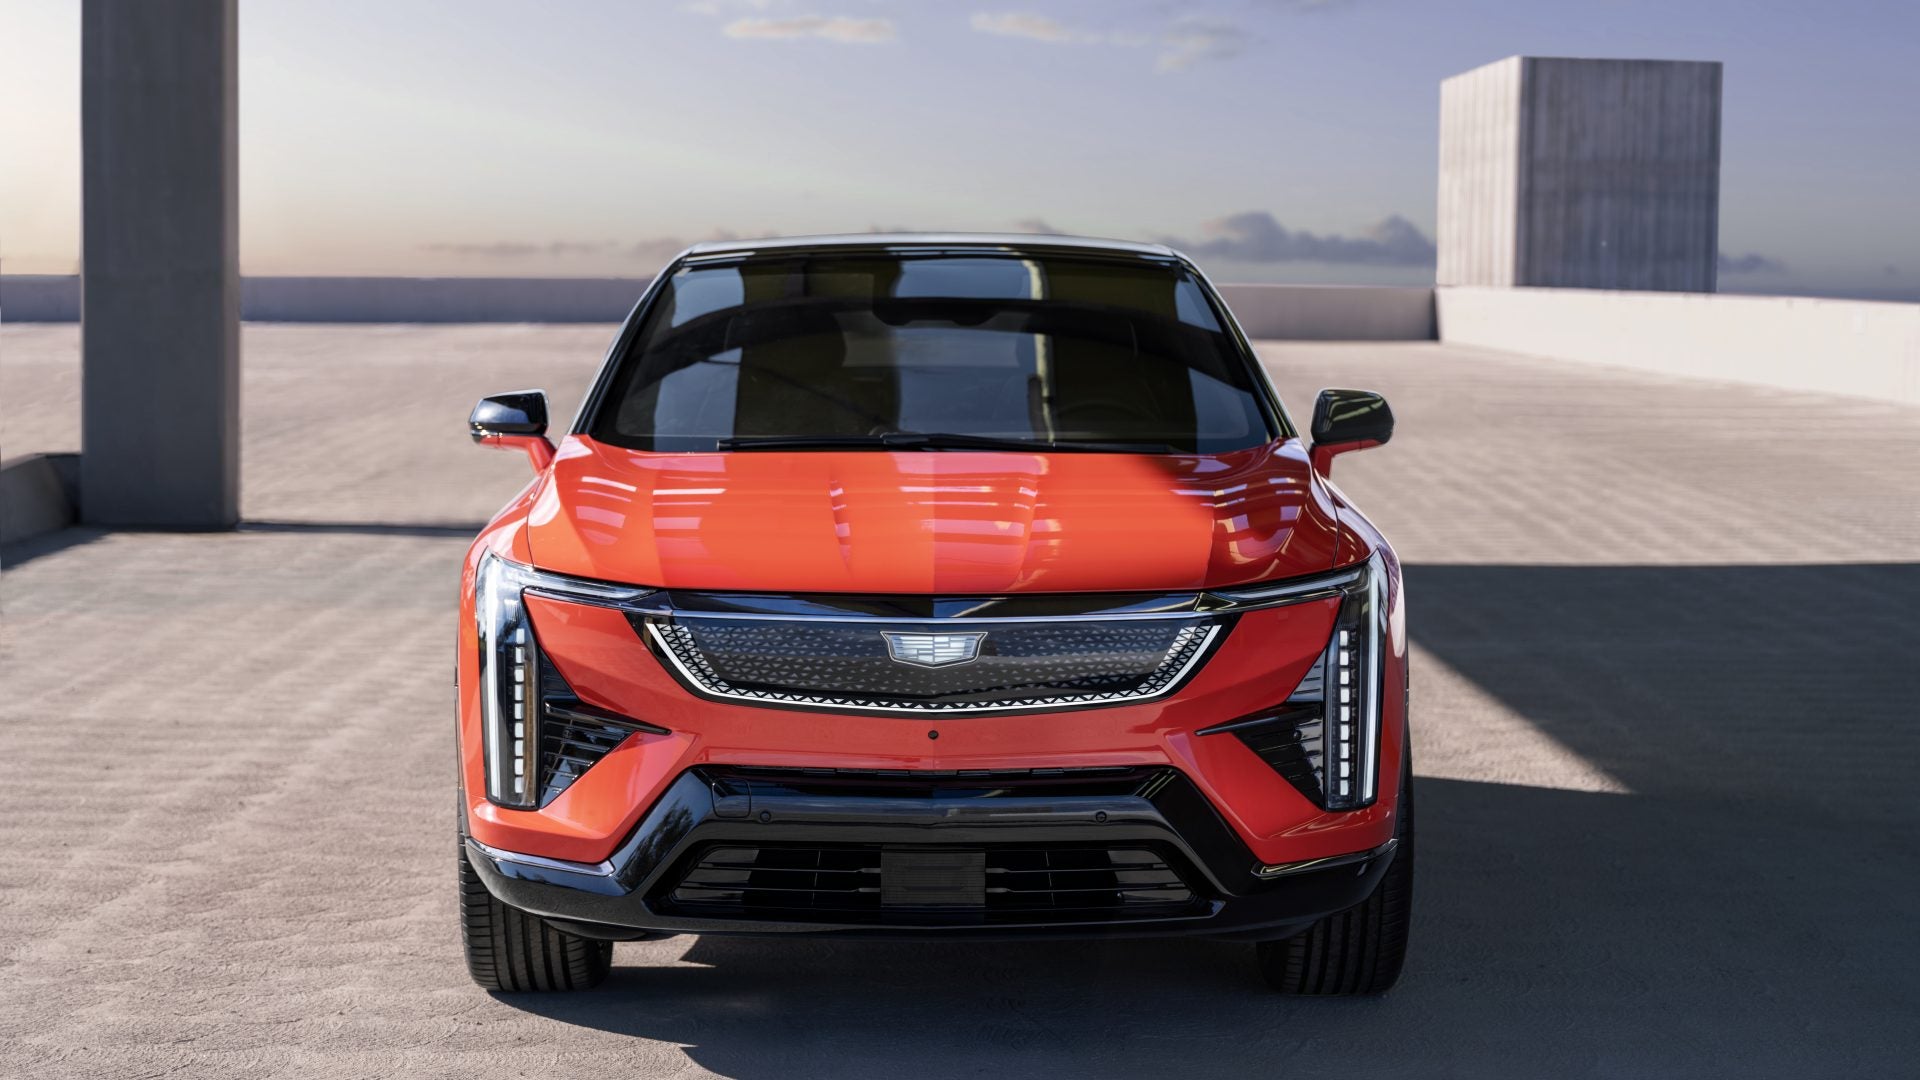 The 2025 Cadillac Optiq Is An Affordable Electric Vehicle That Doesn't Skimp On Style Or Luxury